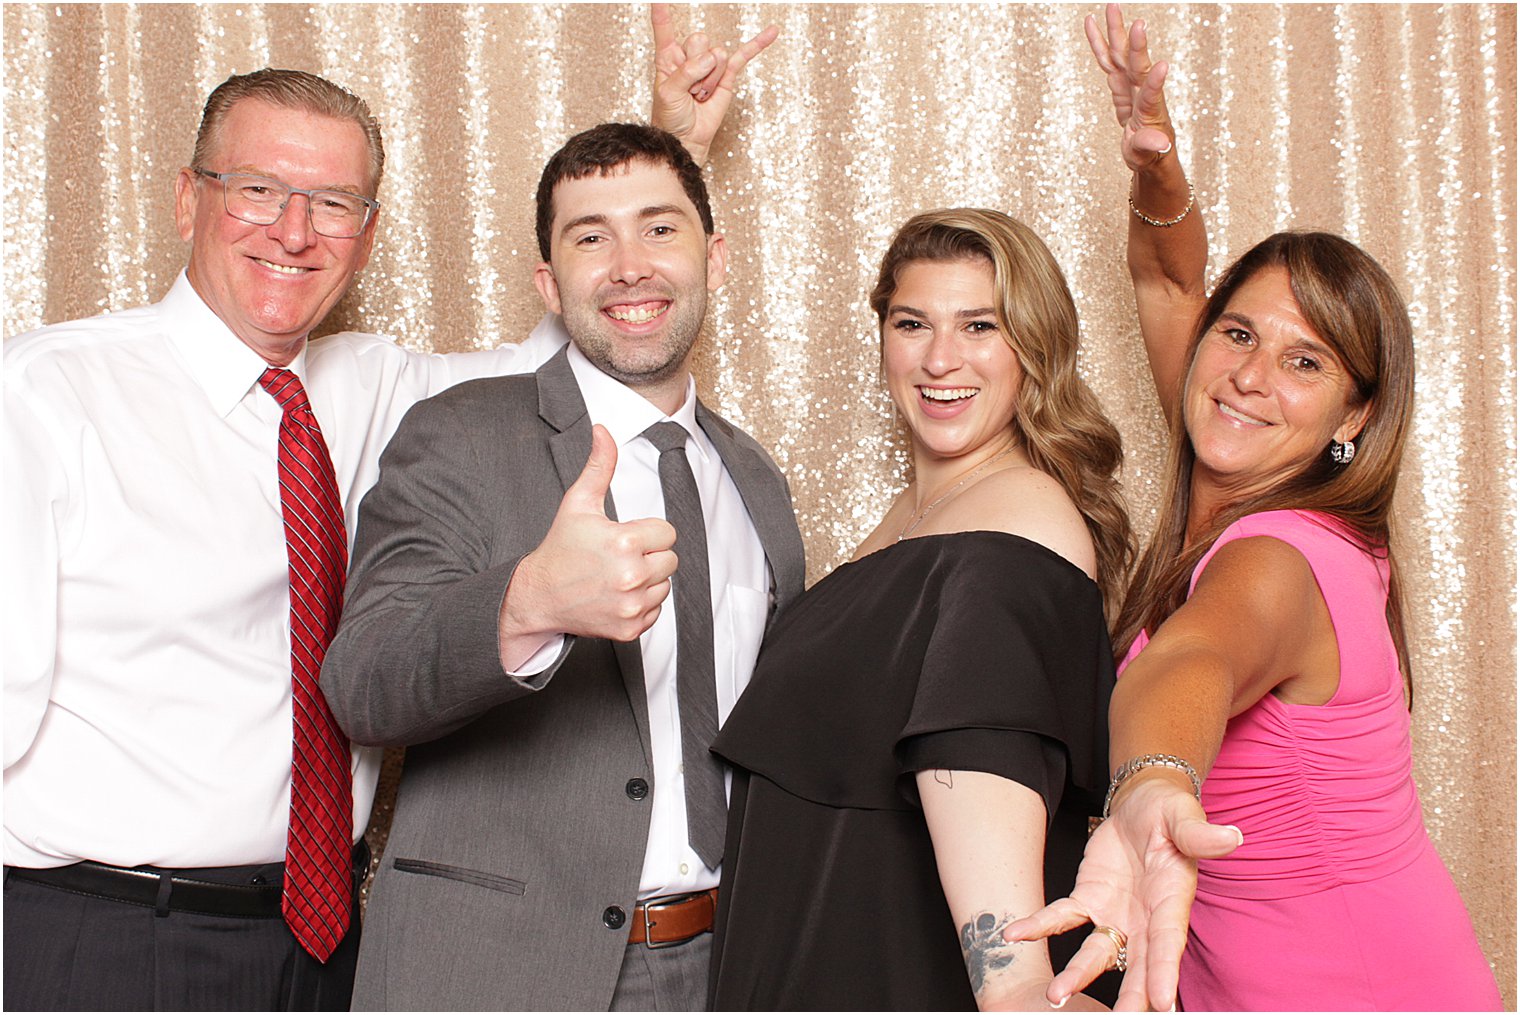 guests pose together in Indian Trail Club photo booth